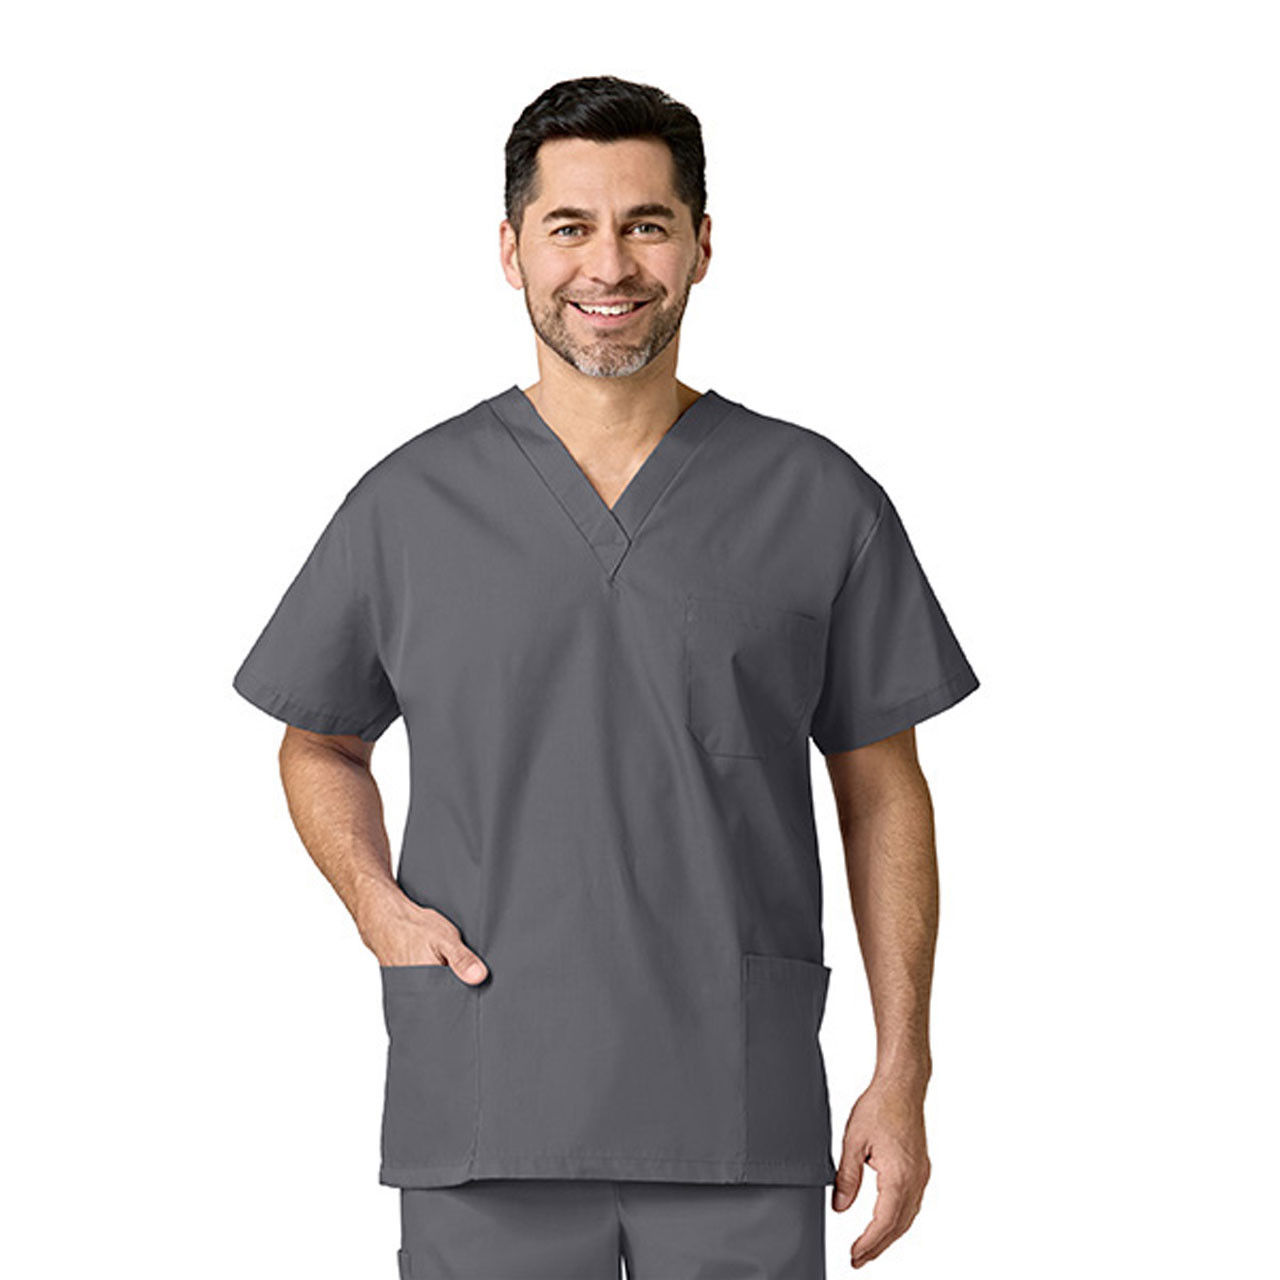 Does the Fashion Seal Scrub Top have a specific design for the sleeves?